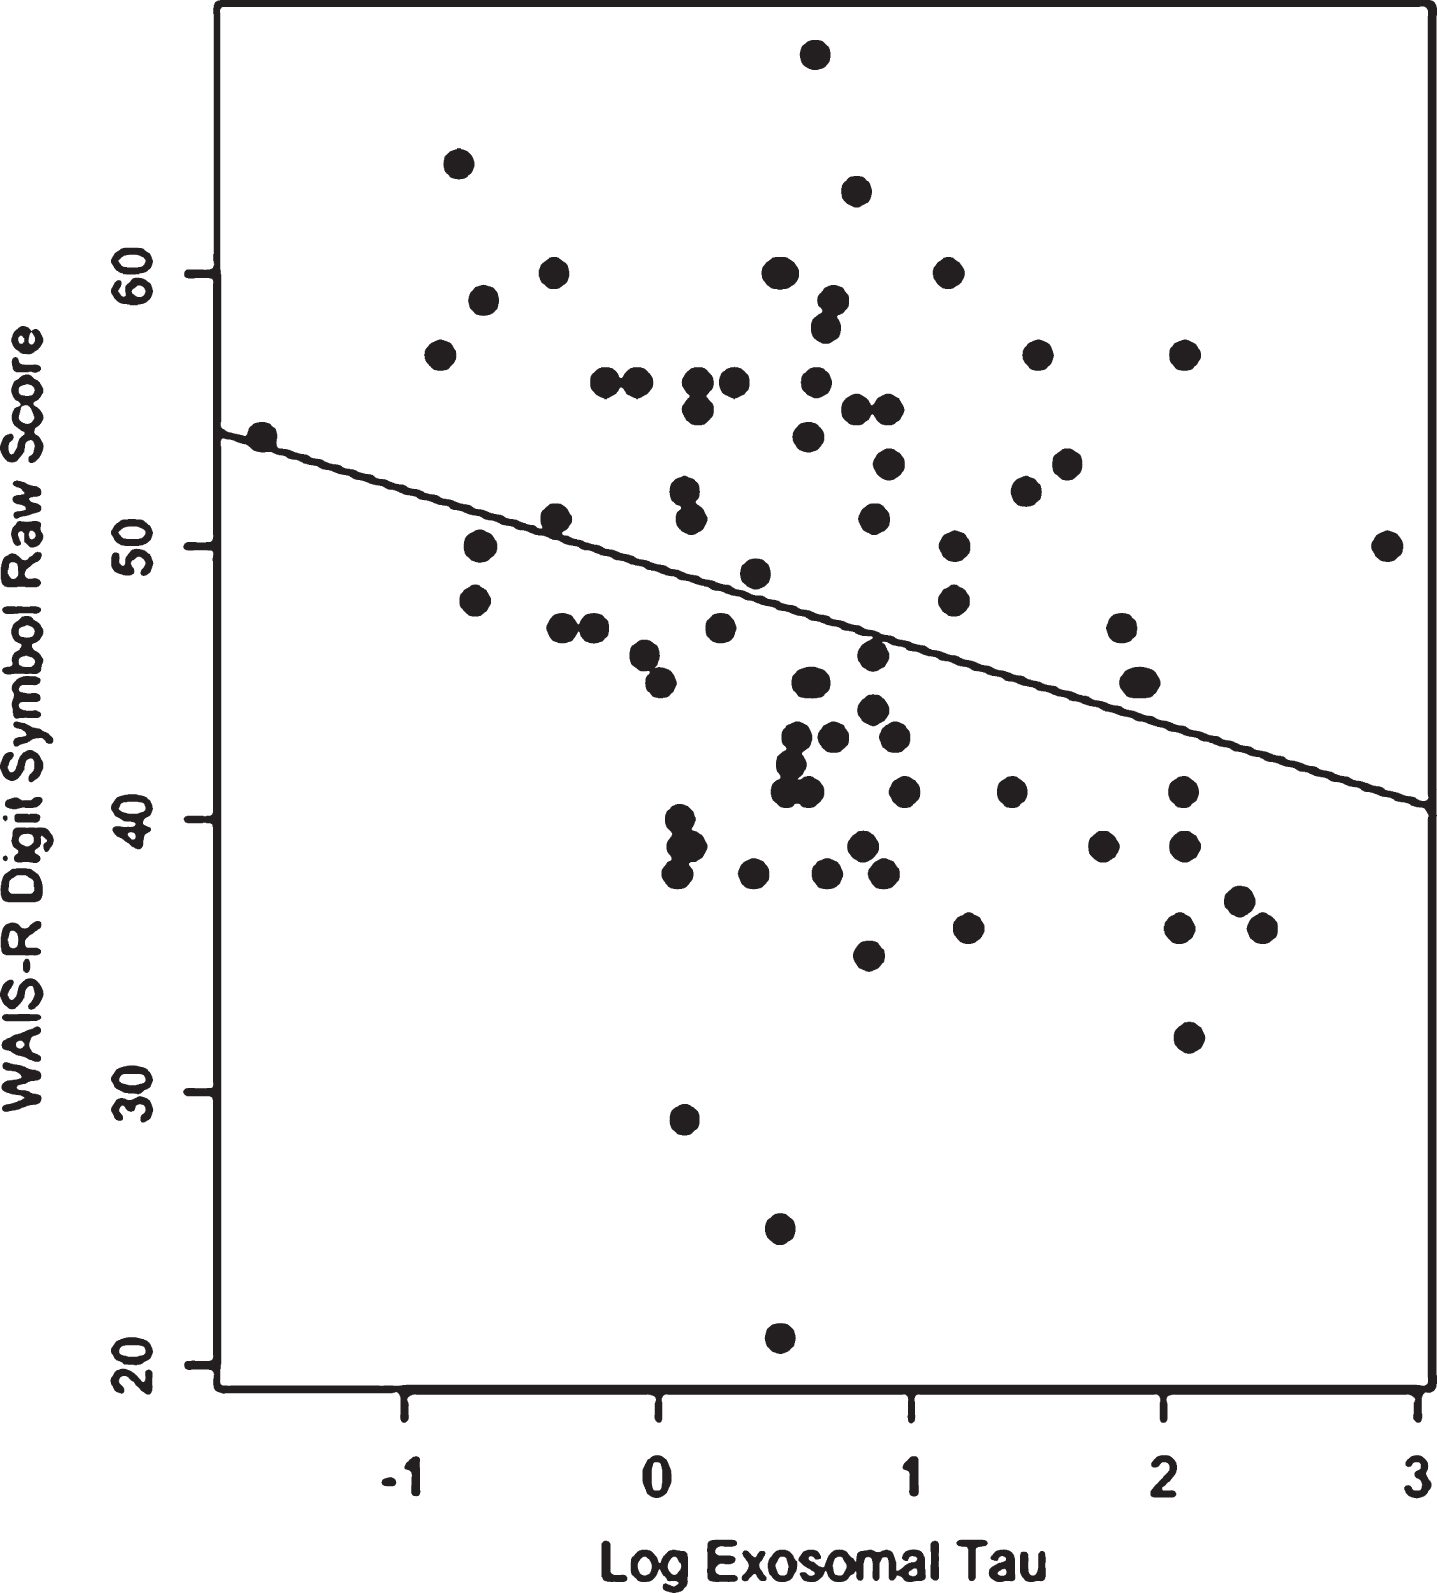 Scatter plot and regression line for the relationship between log exosomal tau and the WAIS-R Digit Symbol raw score for the NFL group (higher Digit Symbol scores reflect better performance).